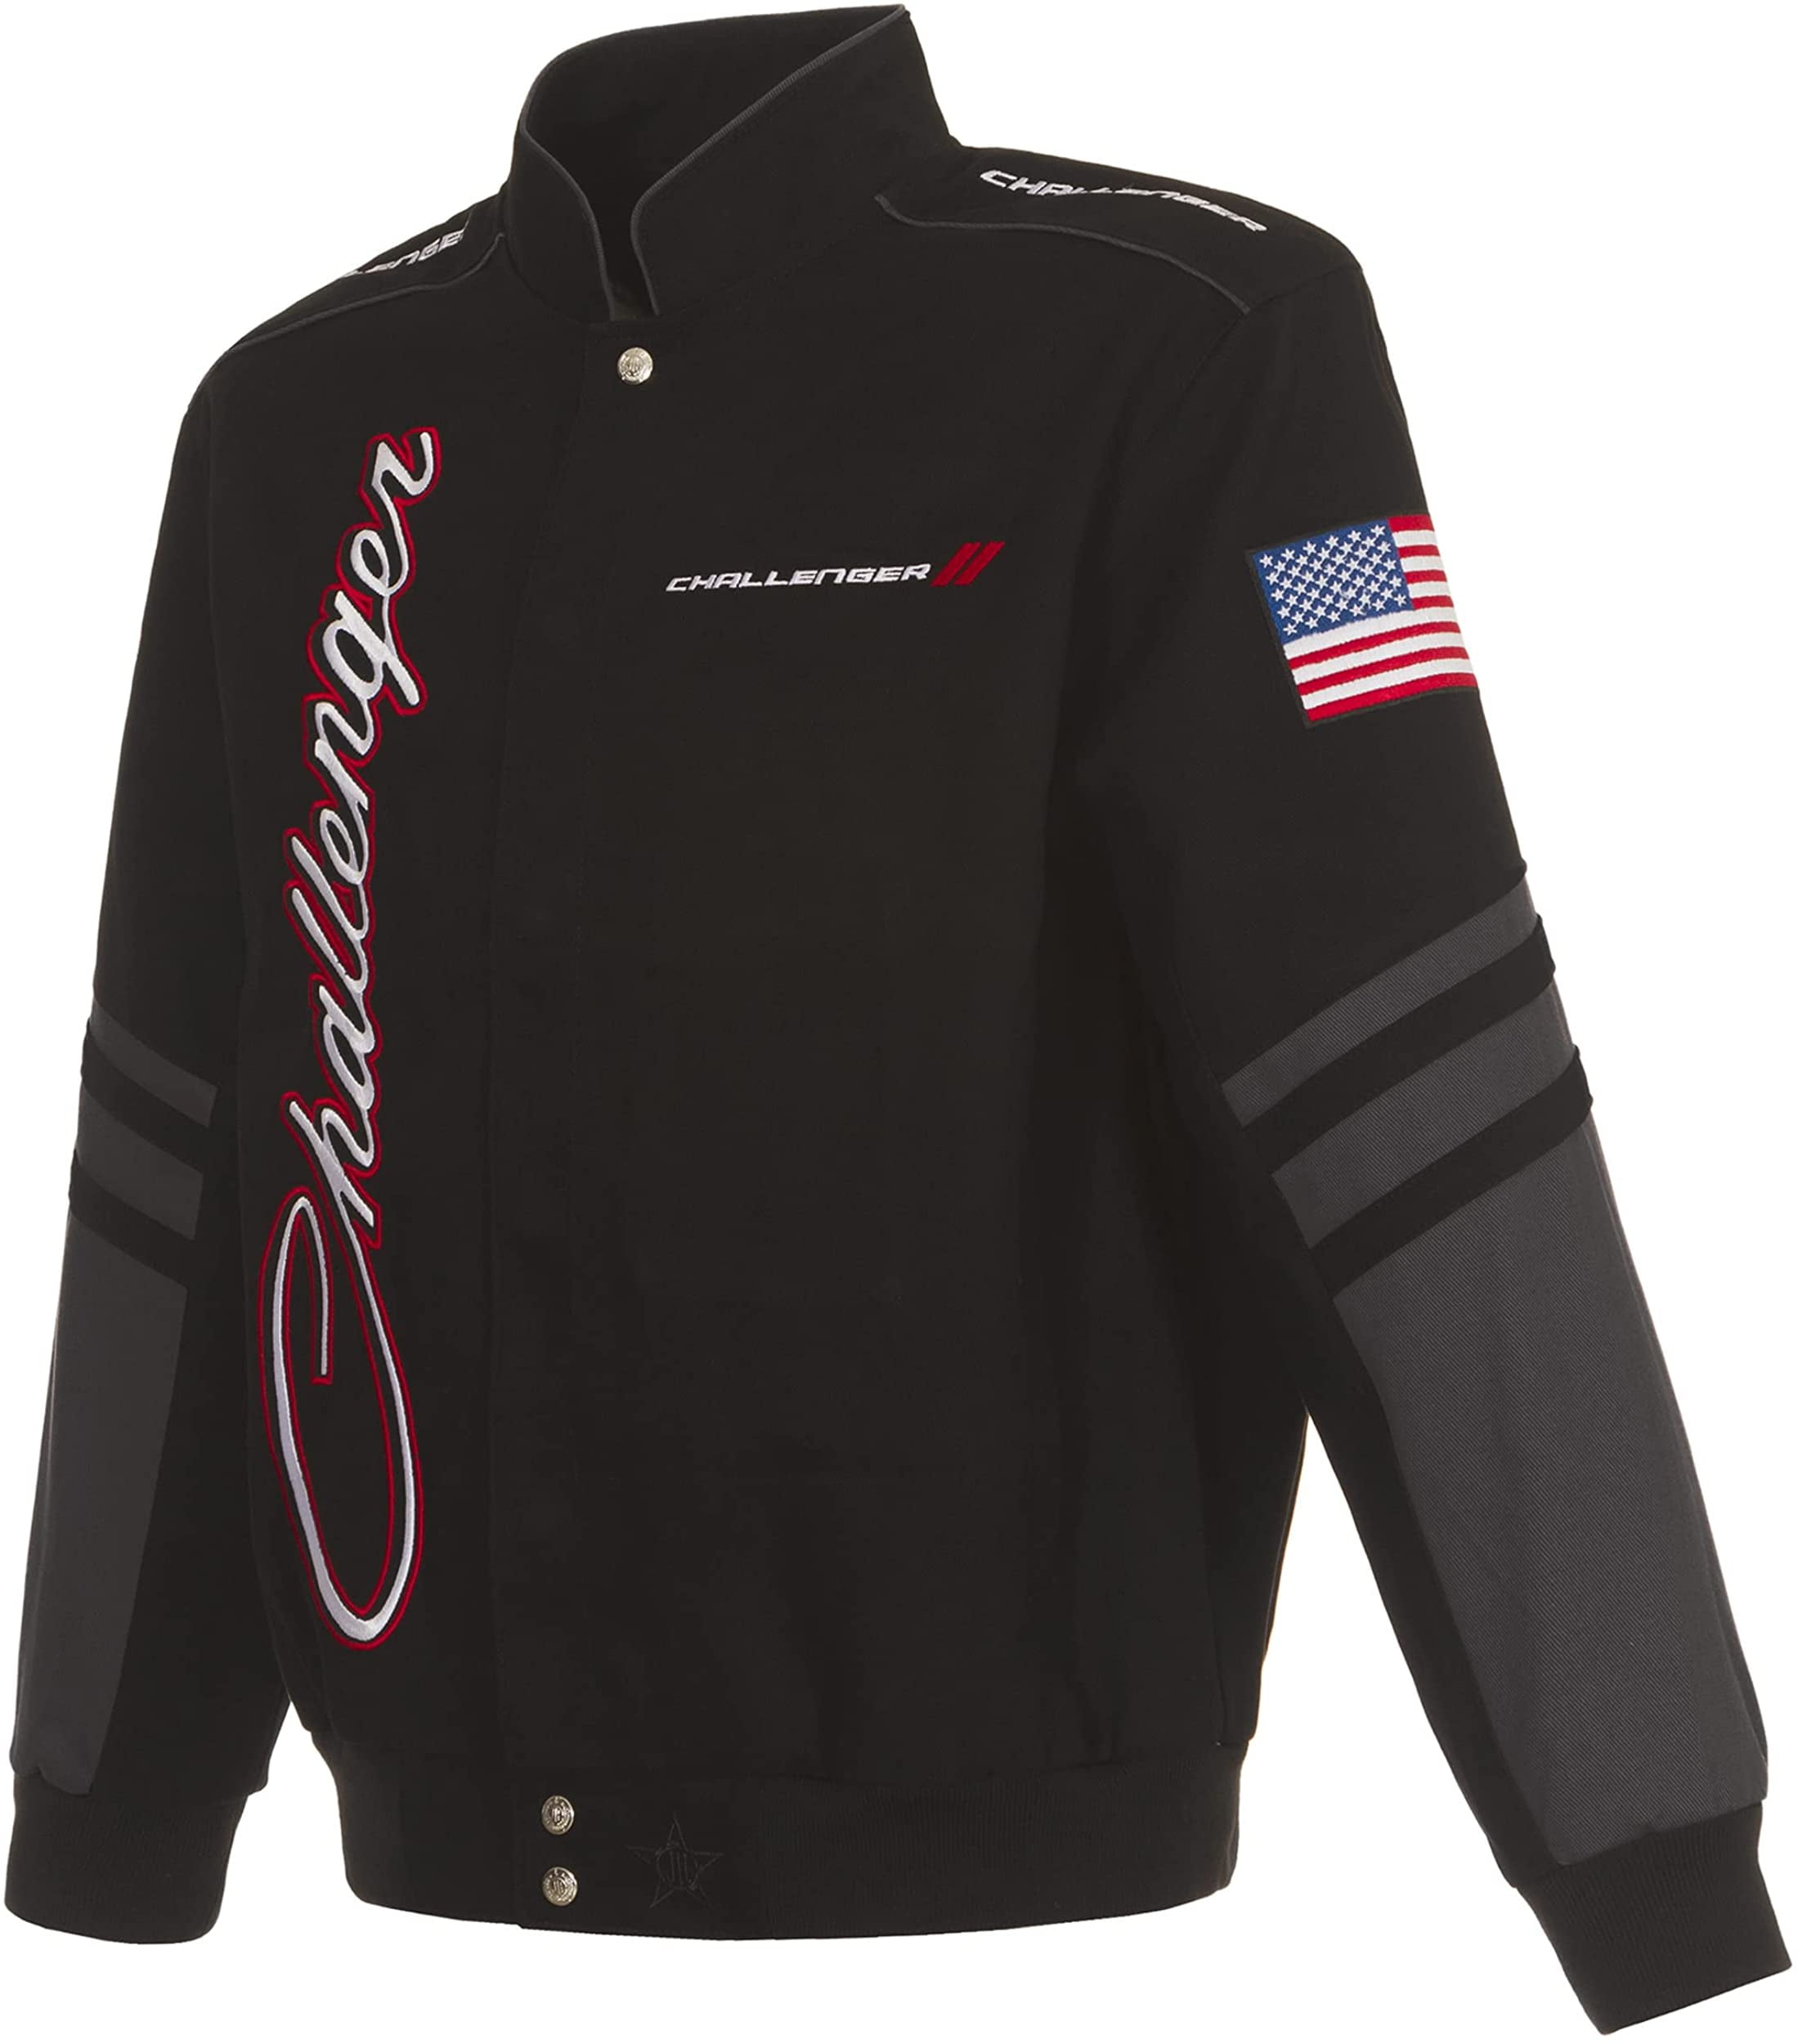 JH Design Men's Dodge Challenger Jacket an Embroidered Classic Twill Coat